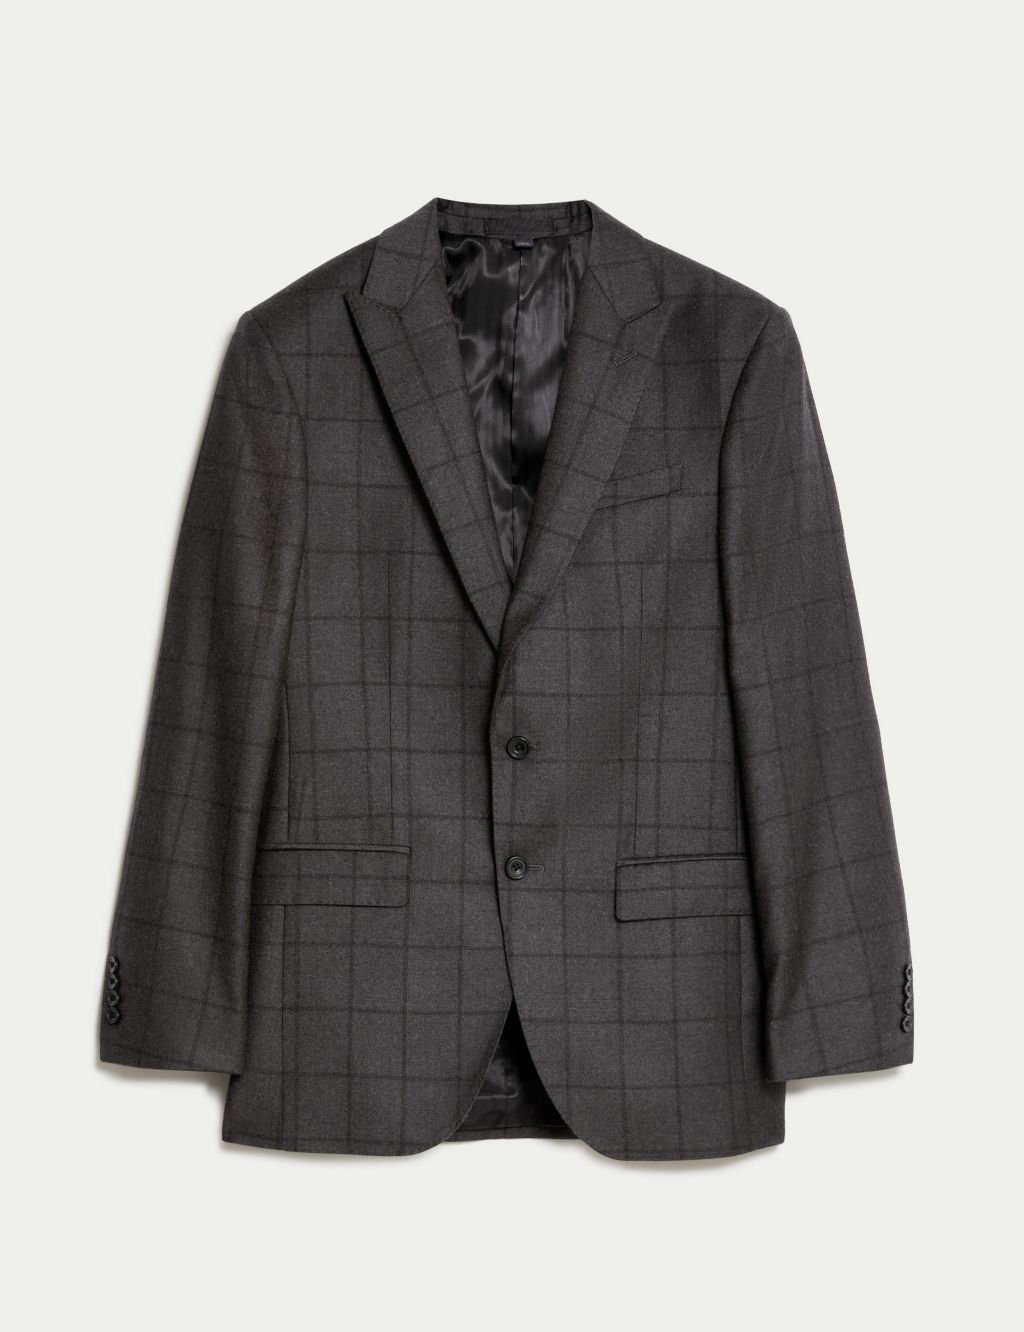 Slim Fit Pure Wool Check Suit Jacket image 2